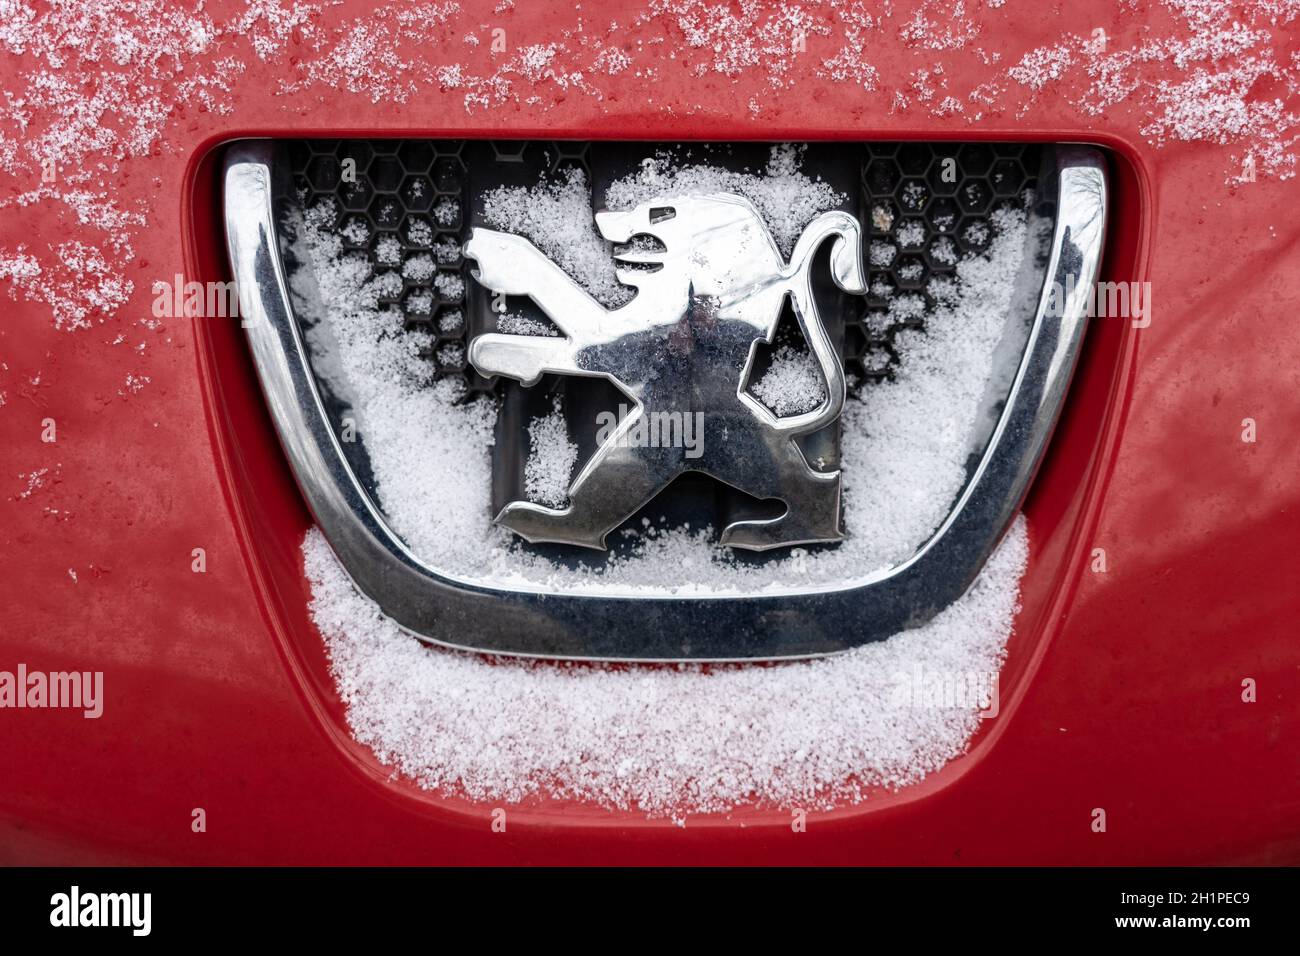 BERLIN - JANUARY 16, 2021: Silver Peugeot emblem on the hood of the car covered with snow. Stock Photo